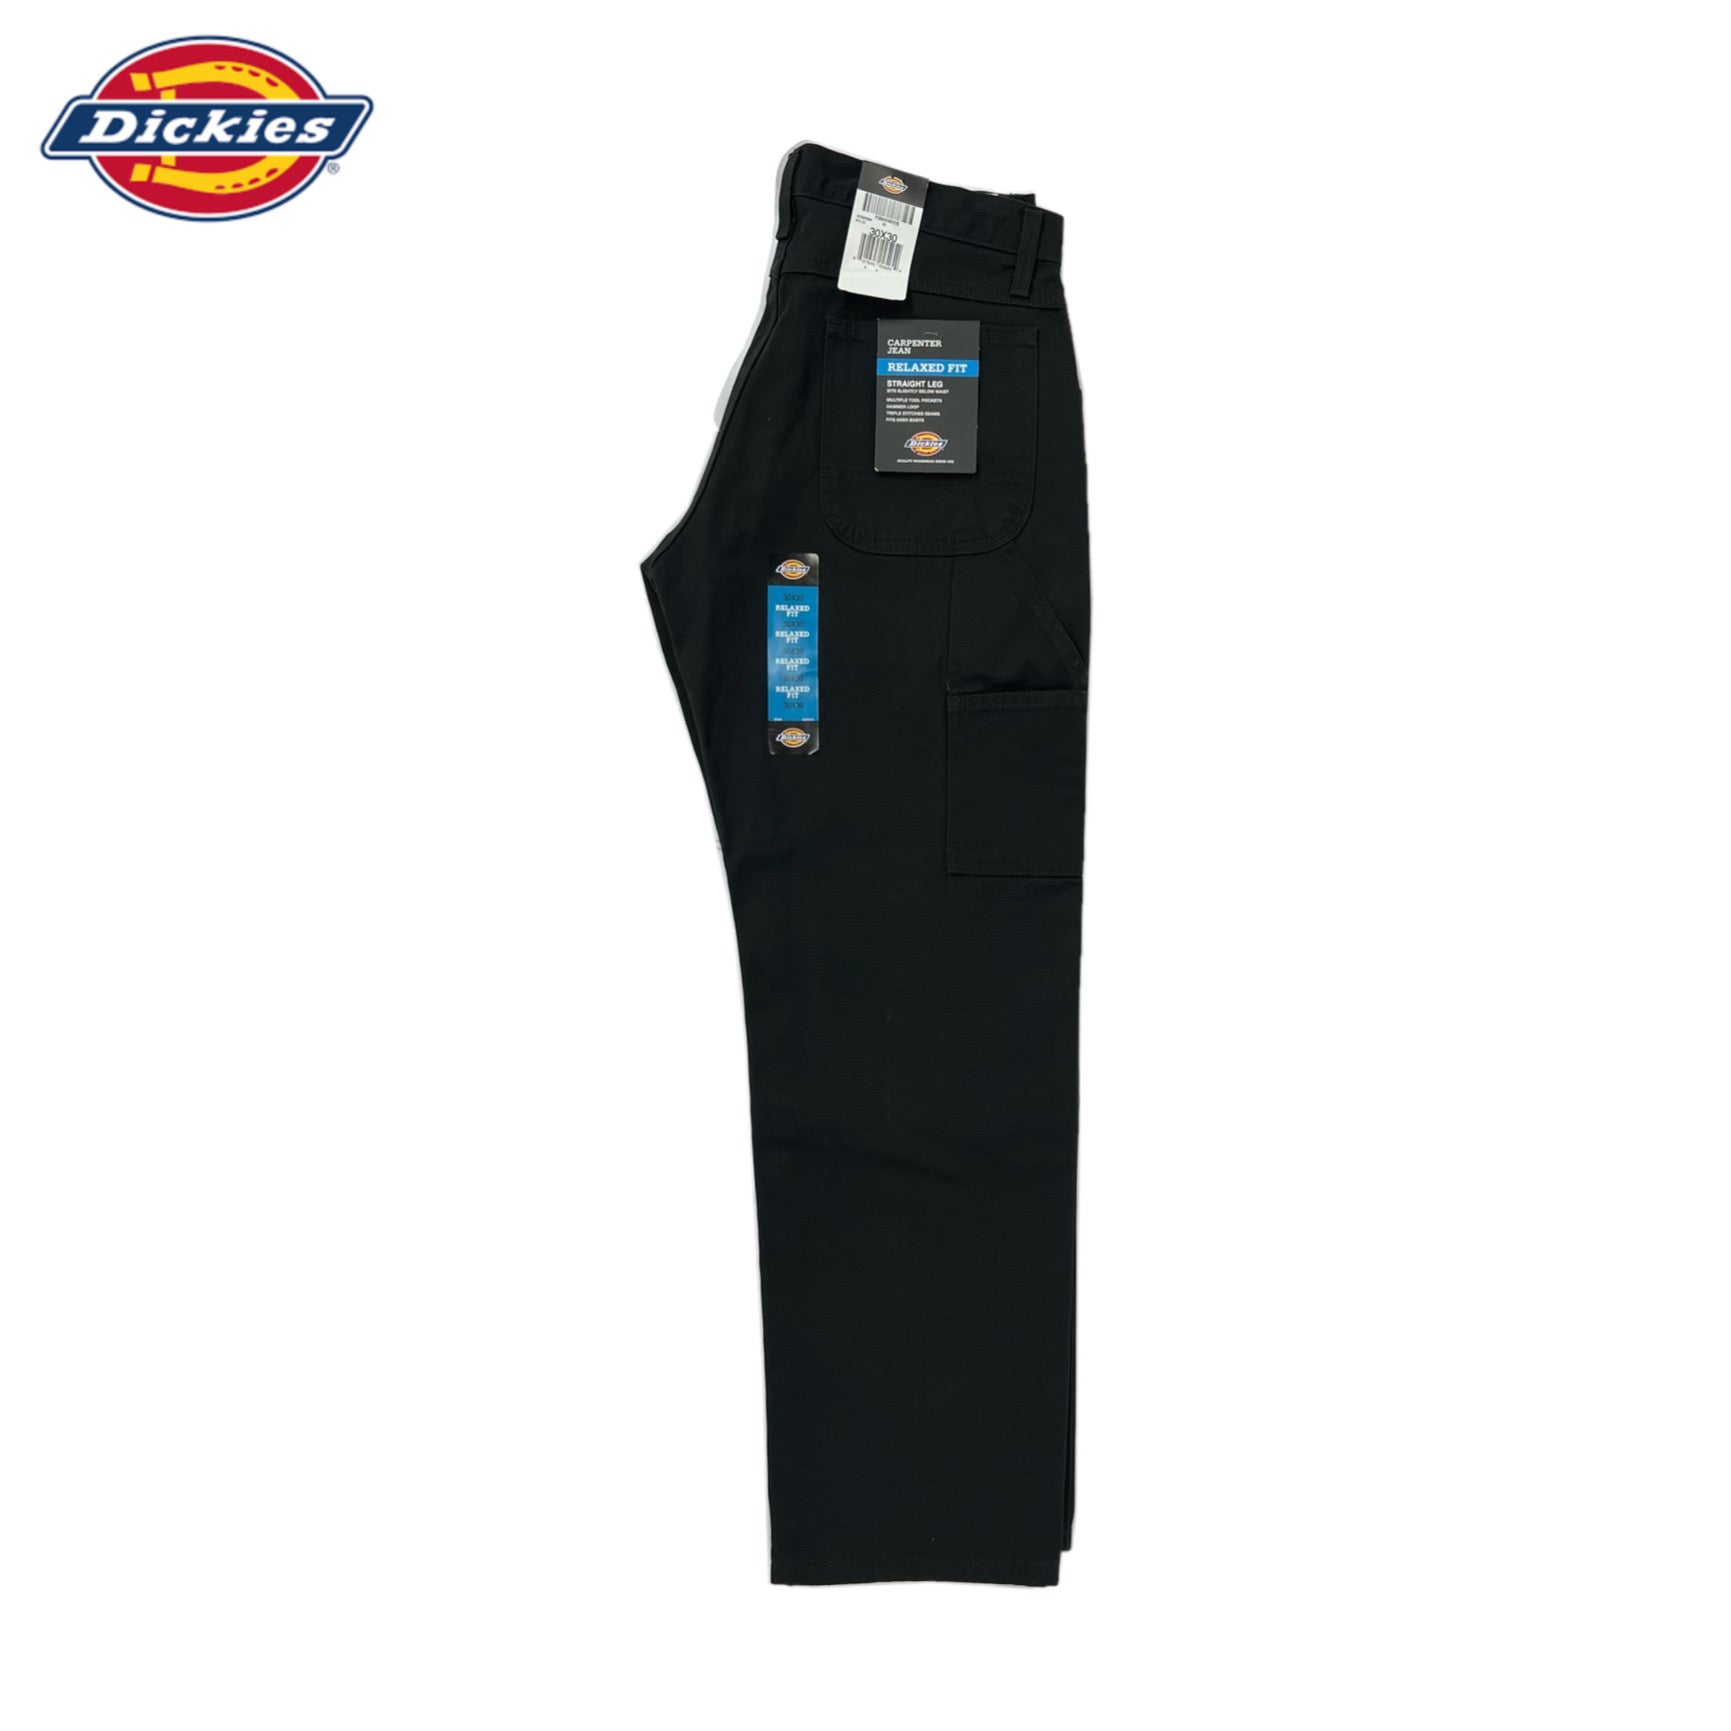 Dickies Relaxed Fit Carpenter Jeans